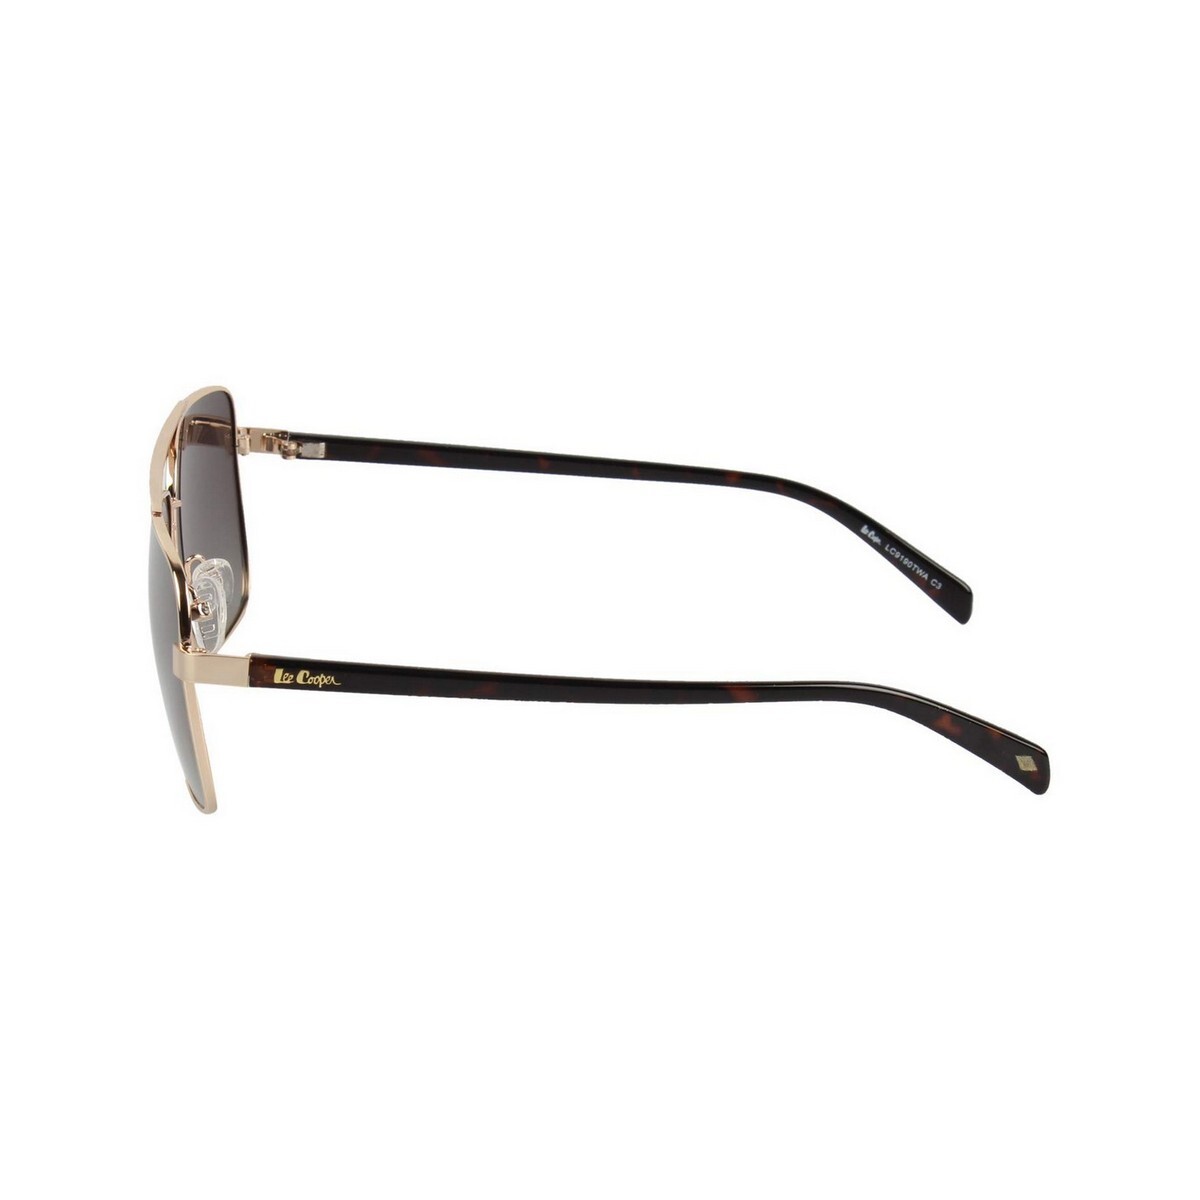 Lee Cooper Male Gold Frame With Green Lens Sunglass